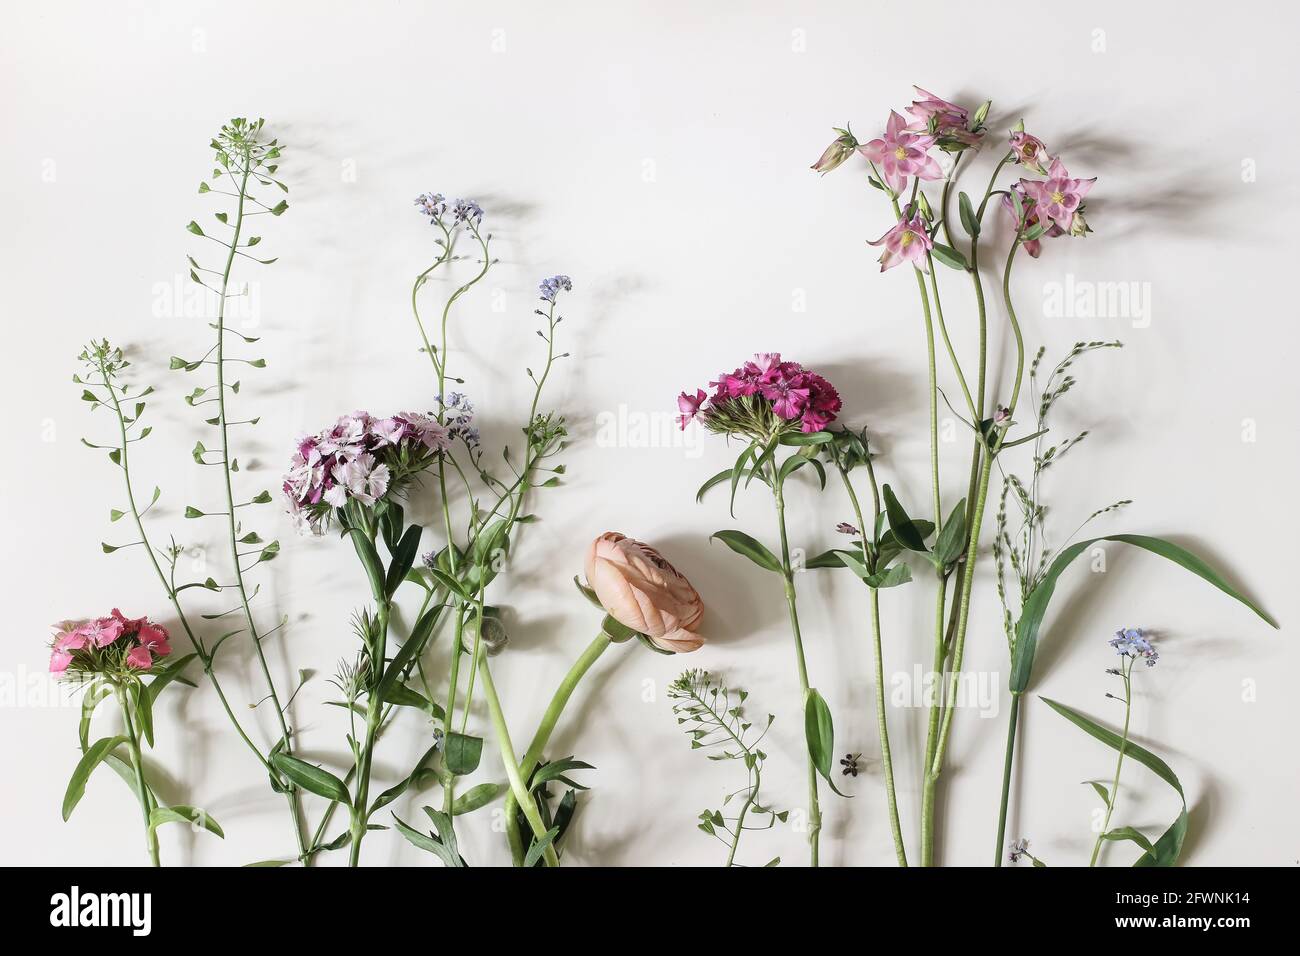 Garden and wild meadow flowers. Floral banner. Shepherd's purse, dianthus, buttercup and aquilegia plants isolated on white table background Stock Photo